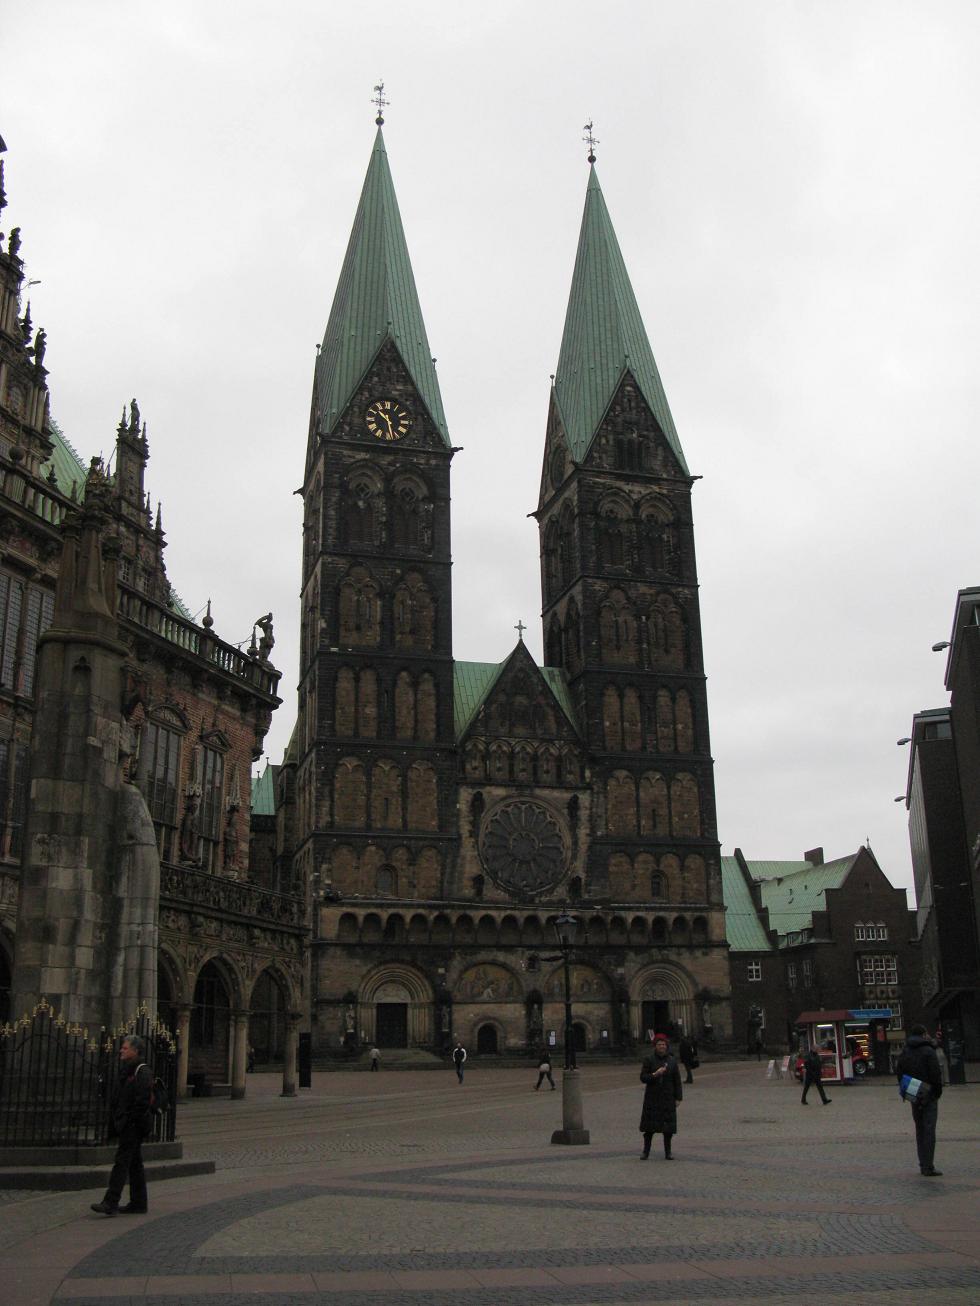 a stone cathedral with steeples stands in a large courtyard